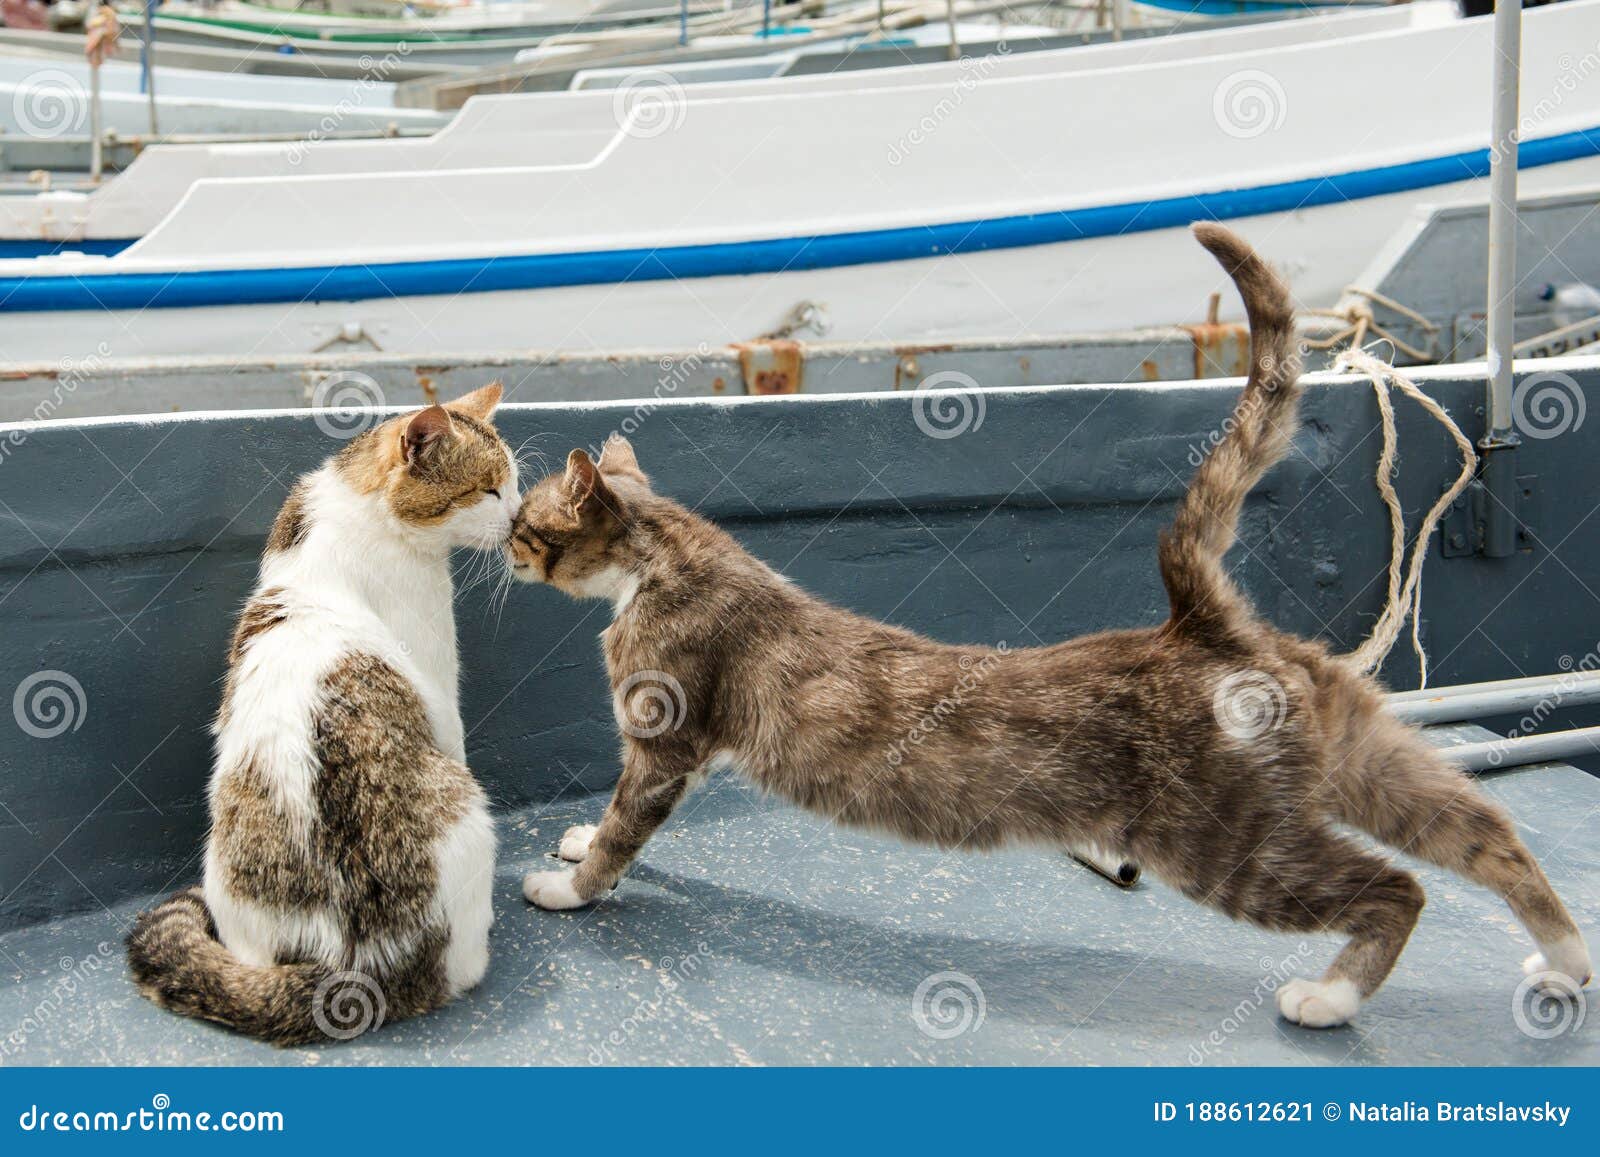 4+ Thousand Cat On Fishing Boat Royalty-Free Images, Stock Photos